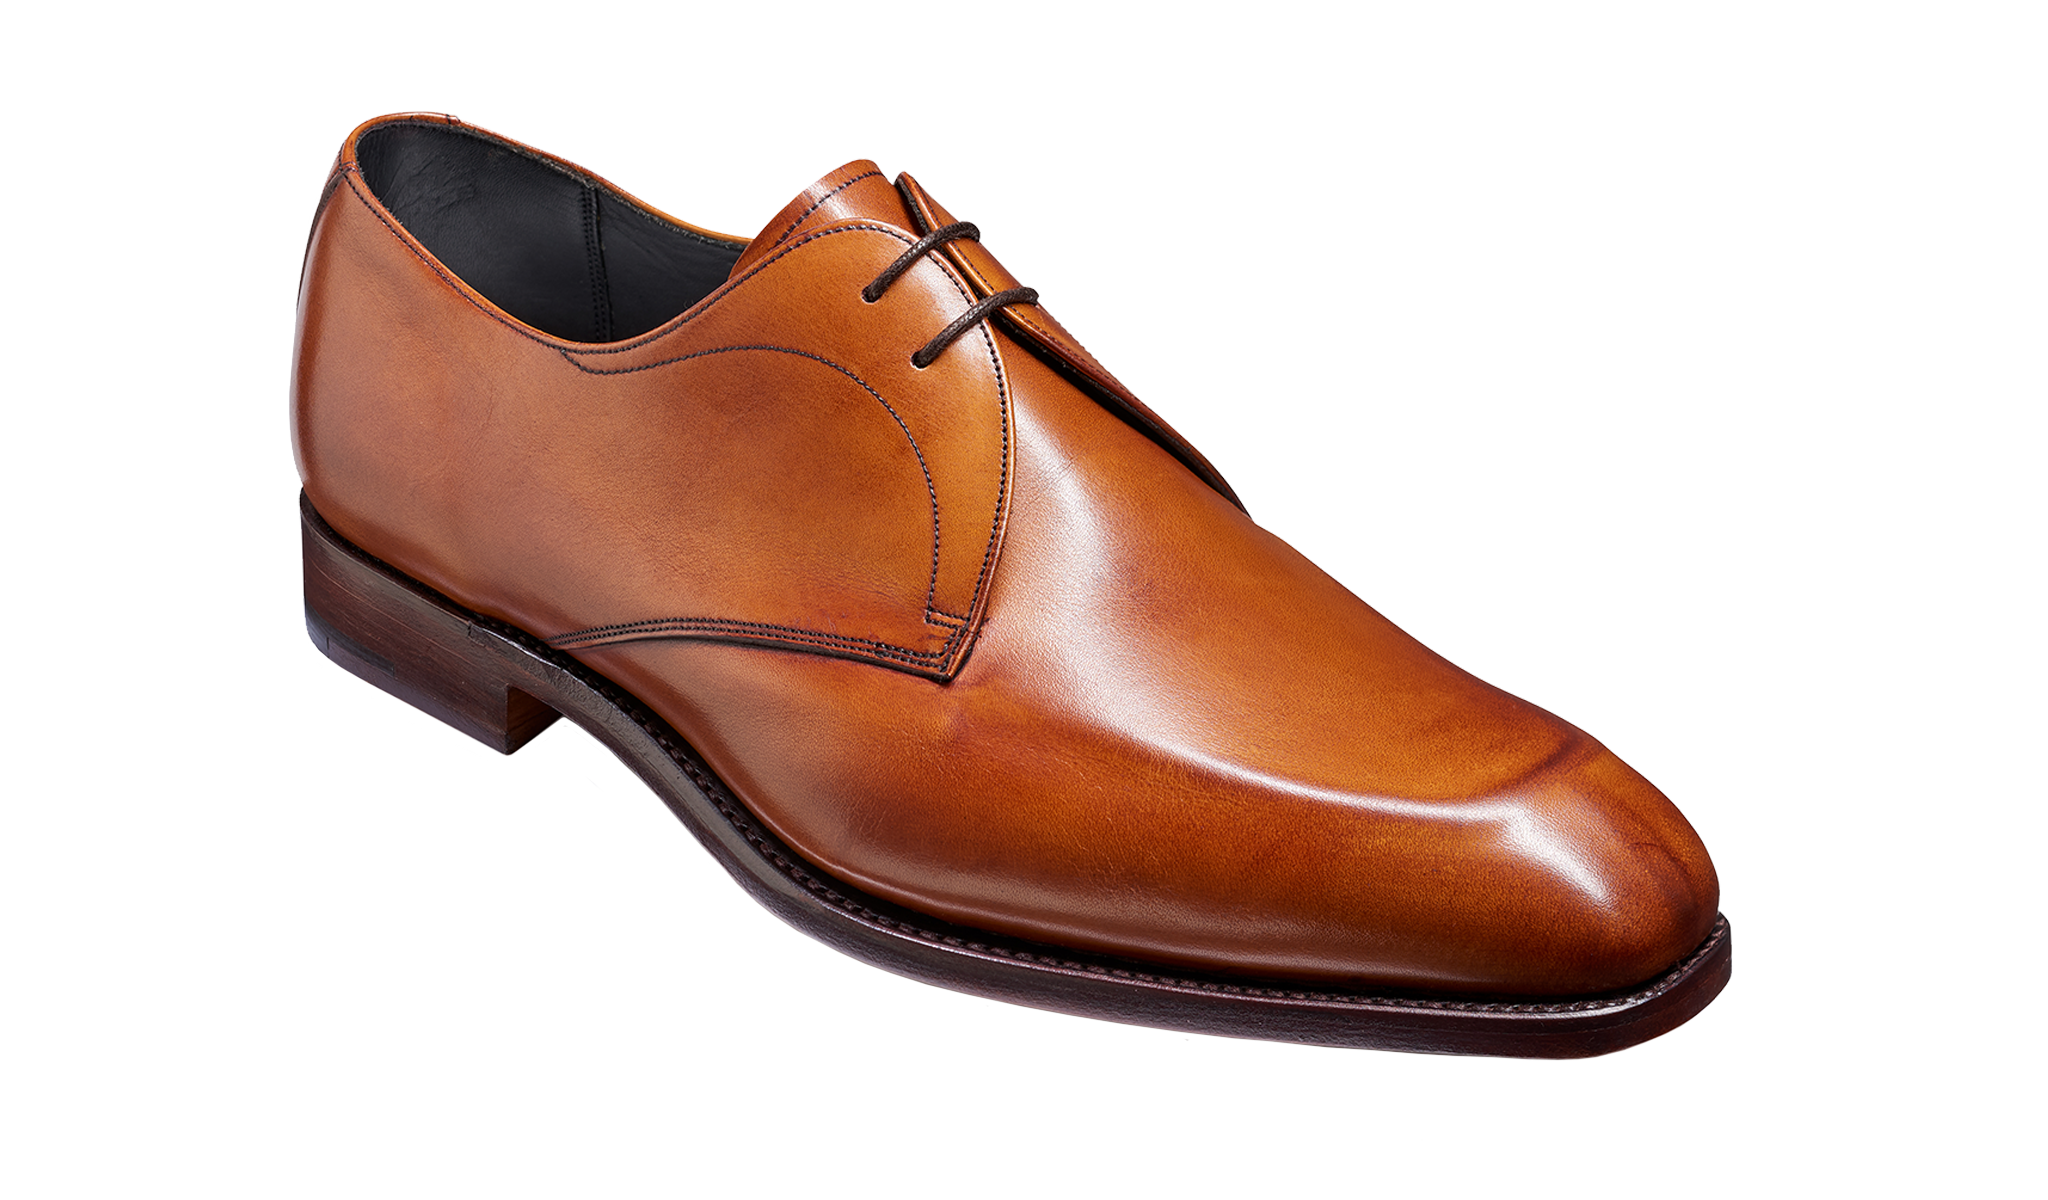 Purley - A men's brown derby shoes by Barker Shoes.